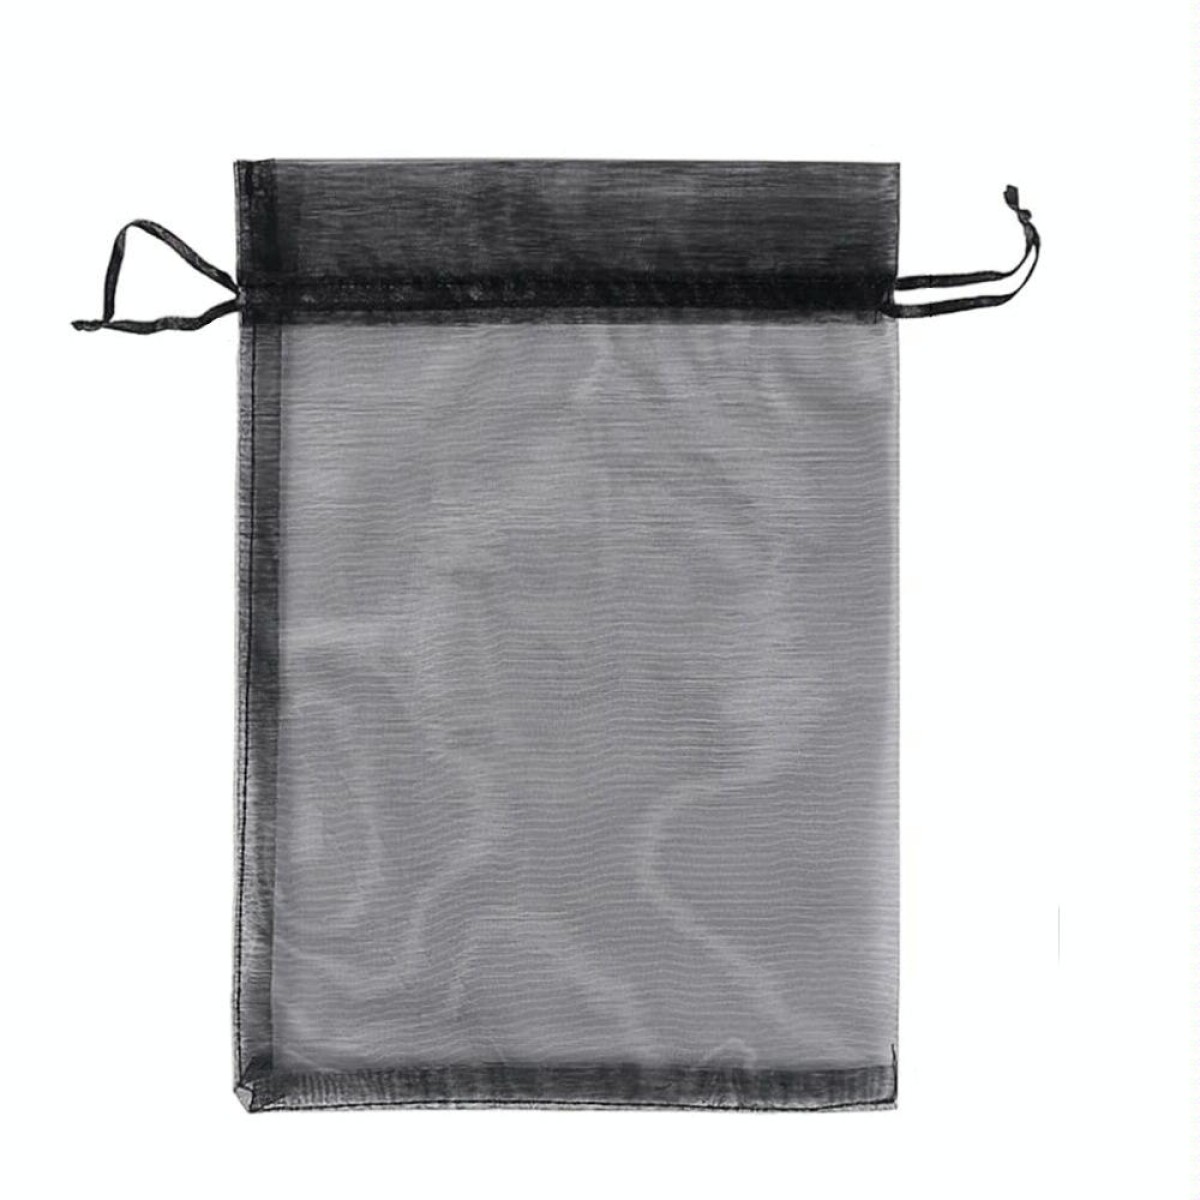 100pcs /Pack  Fruit Protection Bag Anti-Insect And Anti-Bird Net Bag 25 x 35cm(Black)